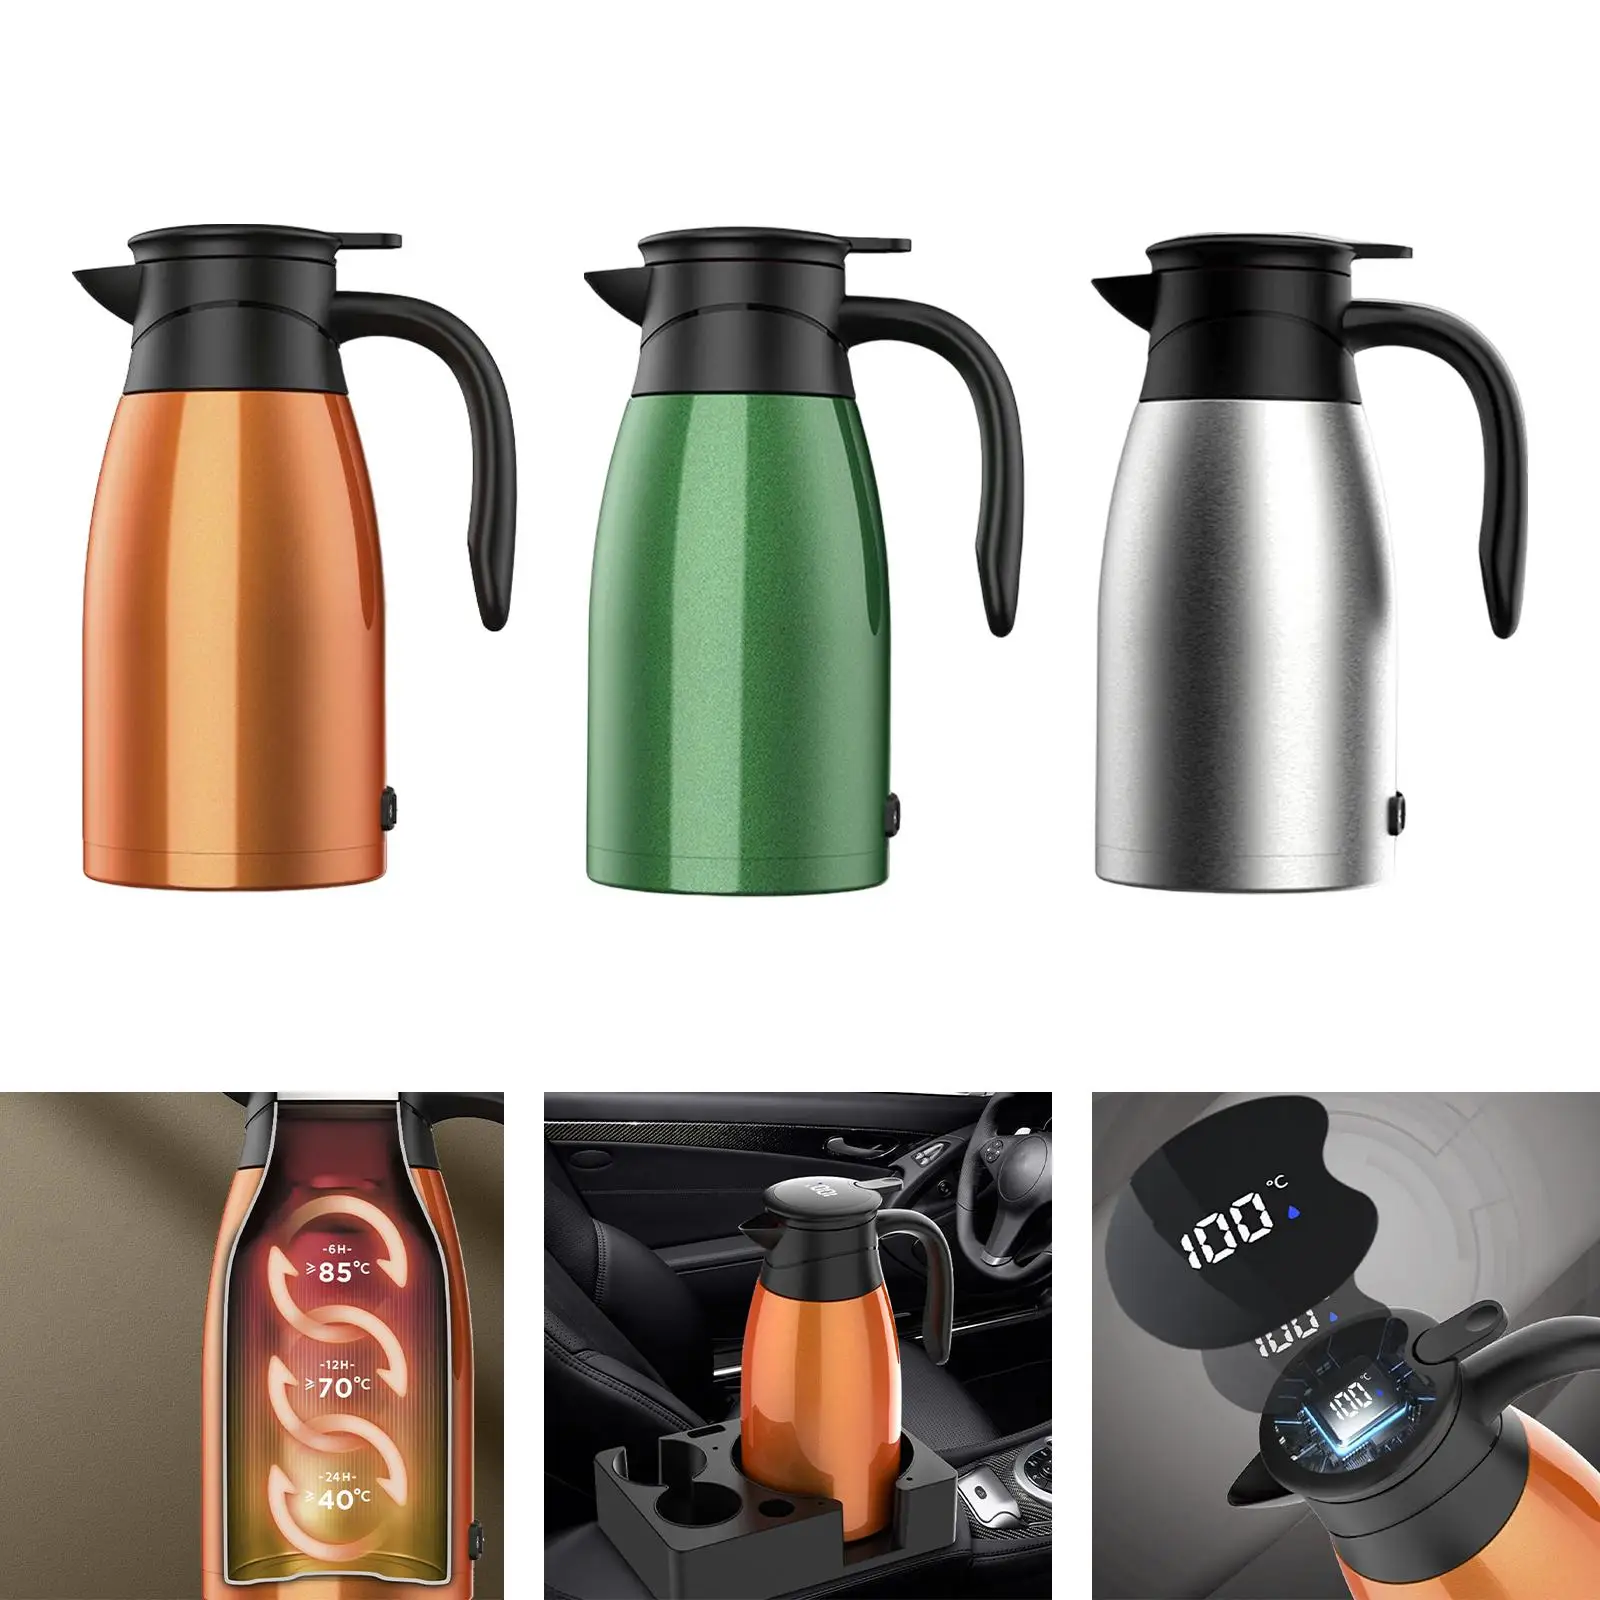 Portable 24V Car Truck Kettle Boiler Heater Cup for Travel Camping